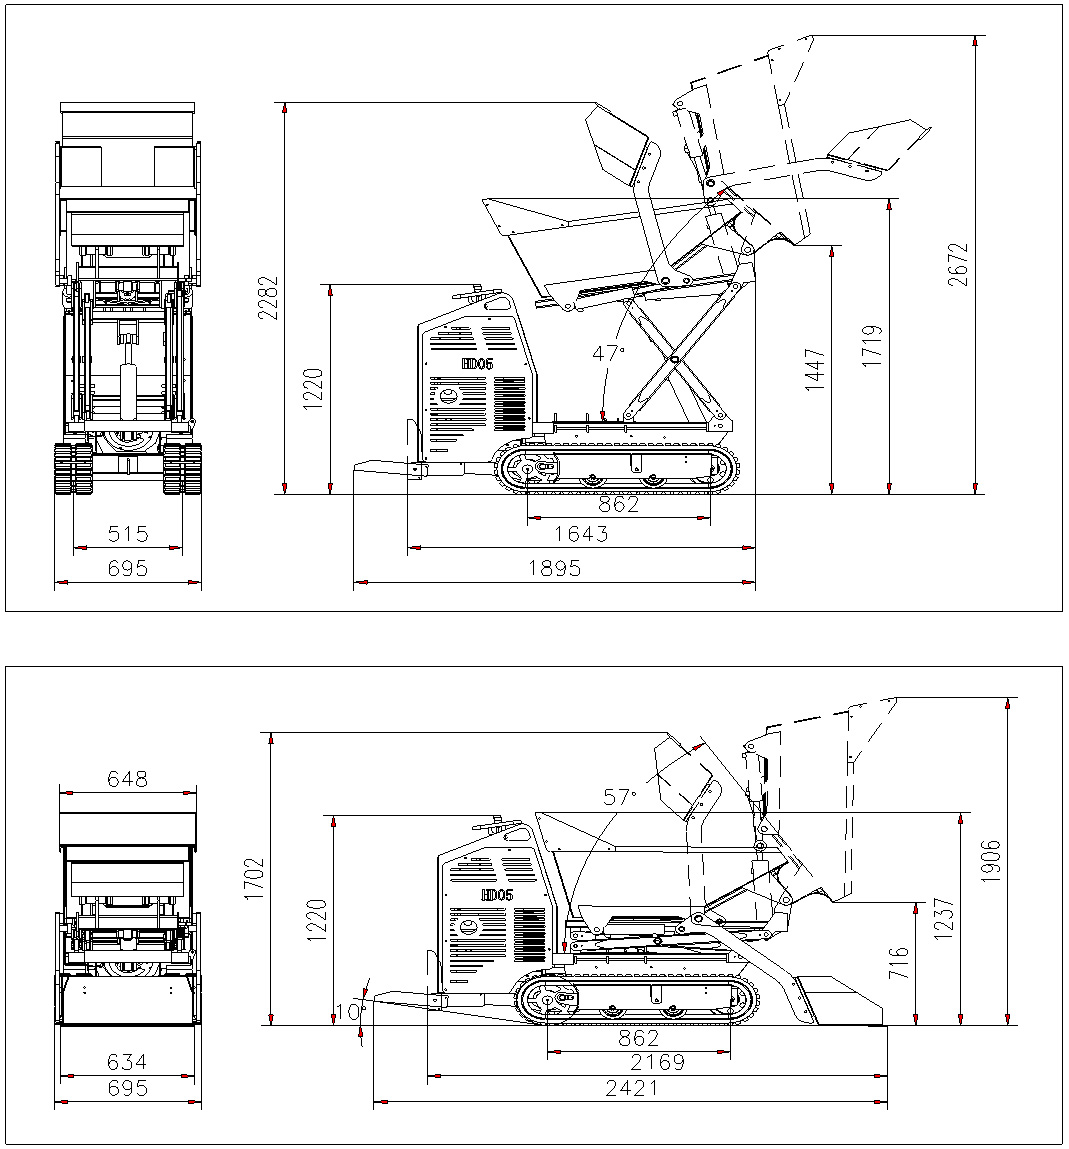 HD05  specification